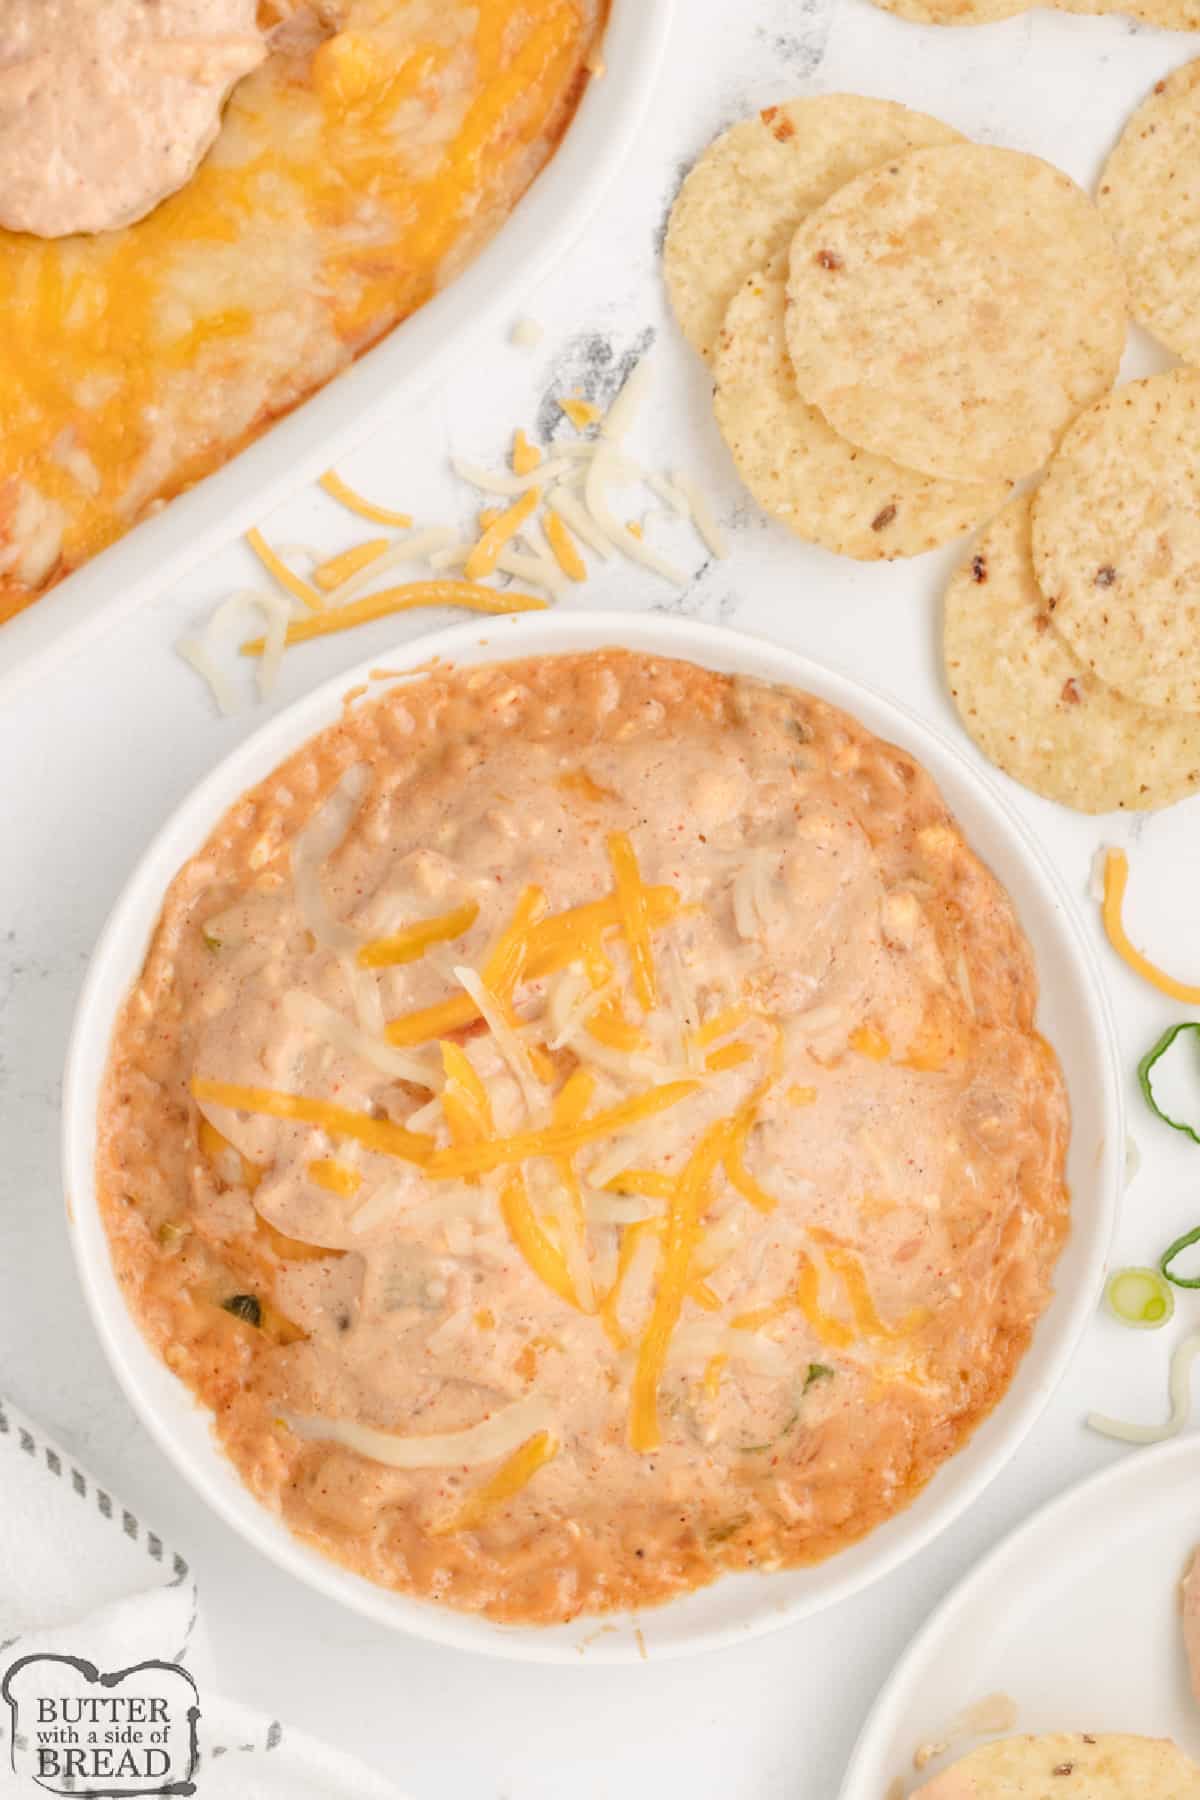 Bean dip made with cream cheese, sour cream, refried beans, and cheddar cheese. 